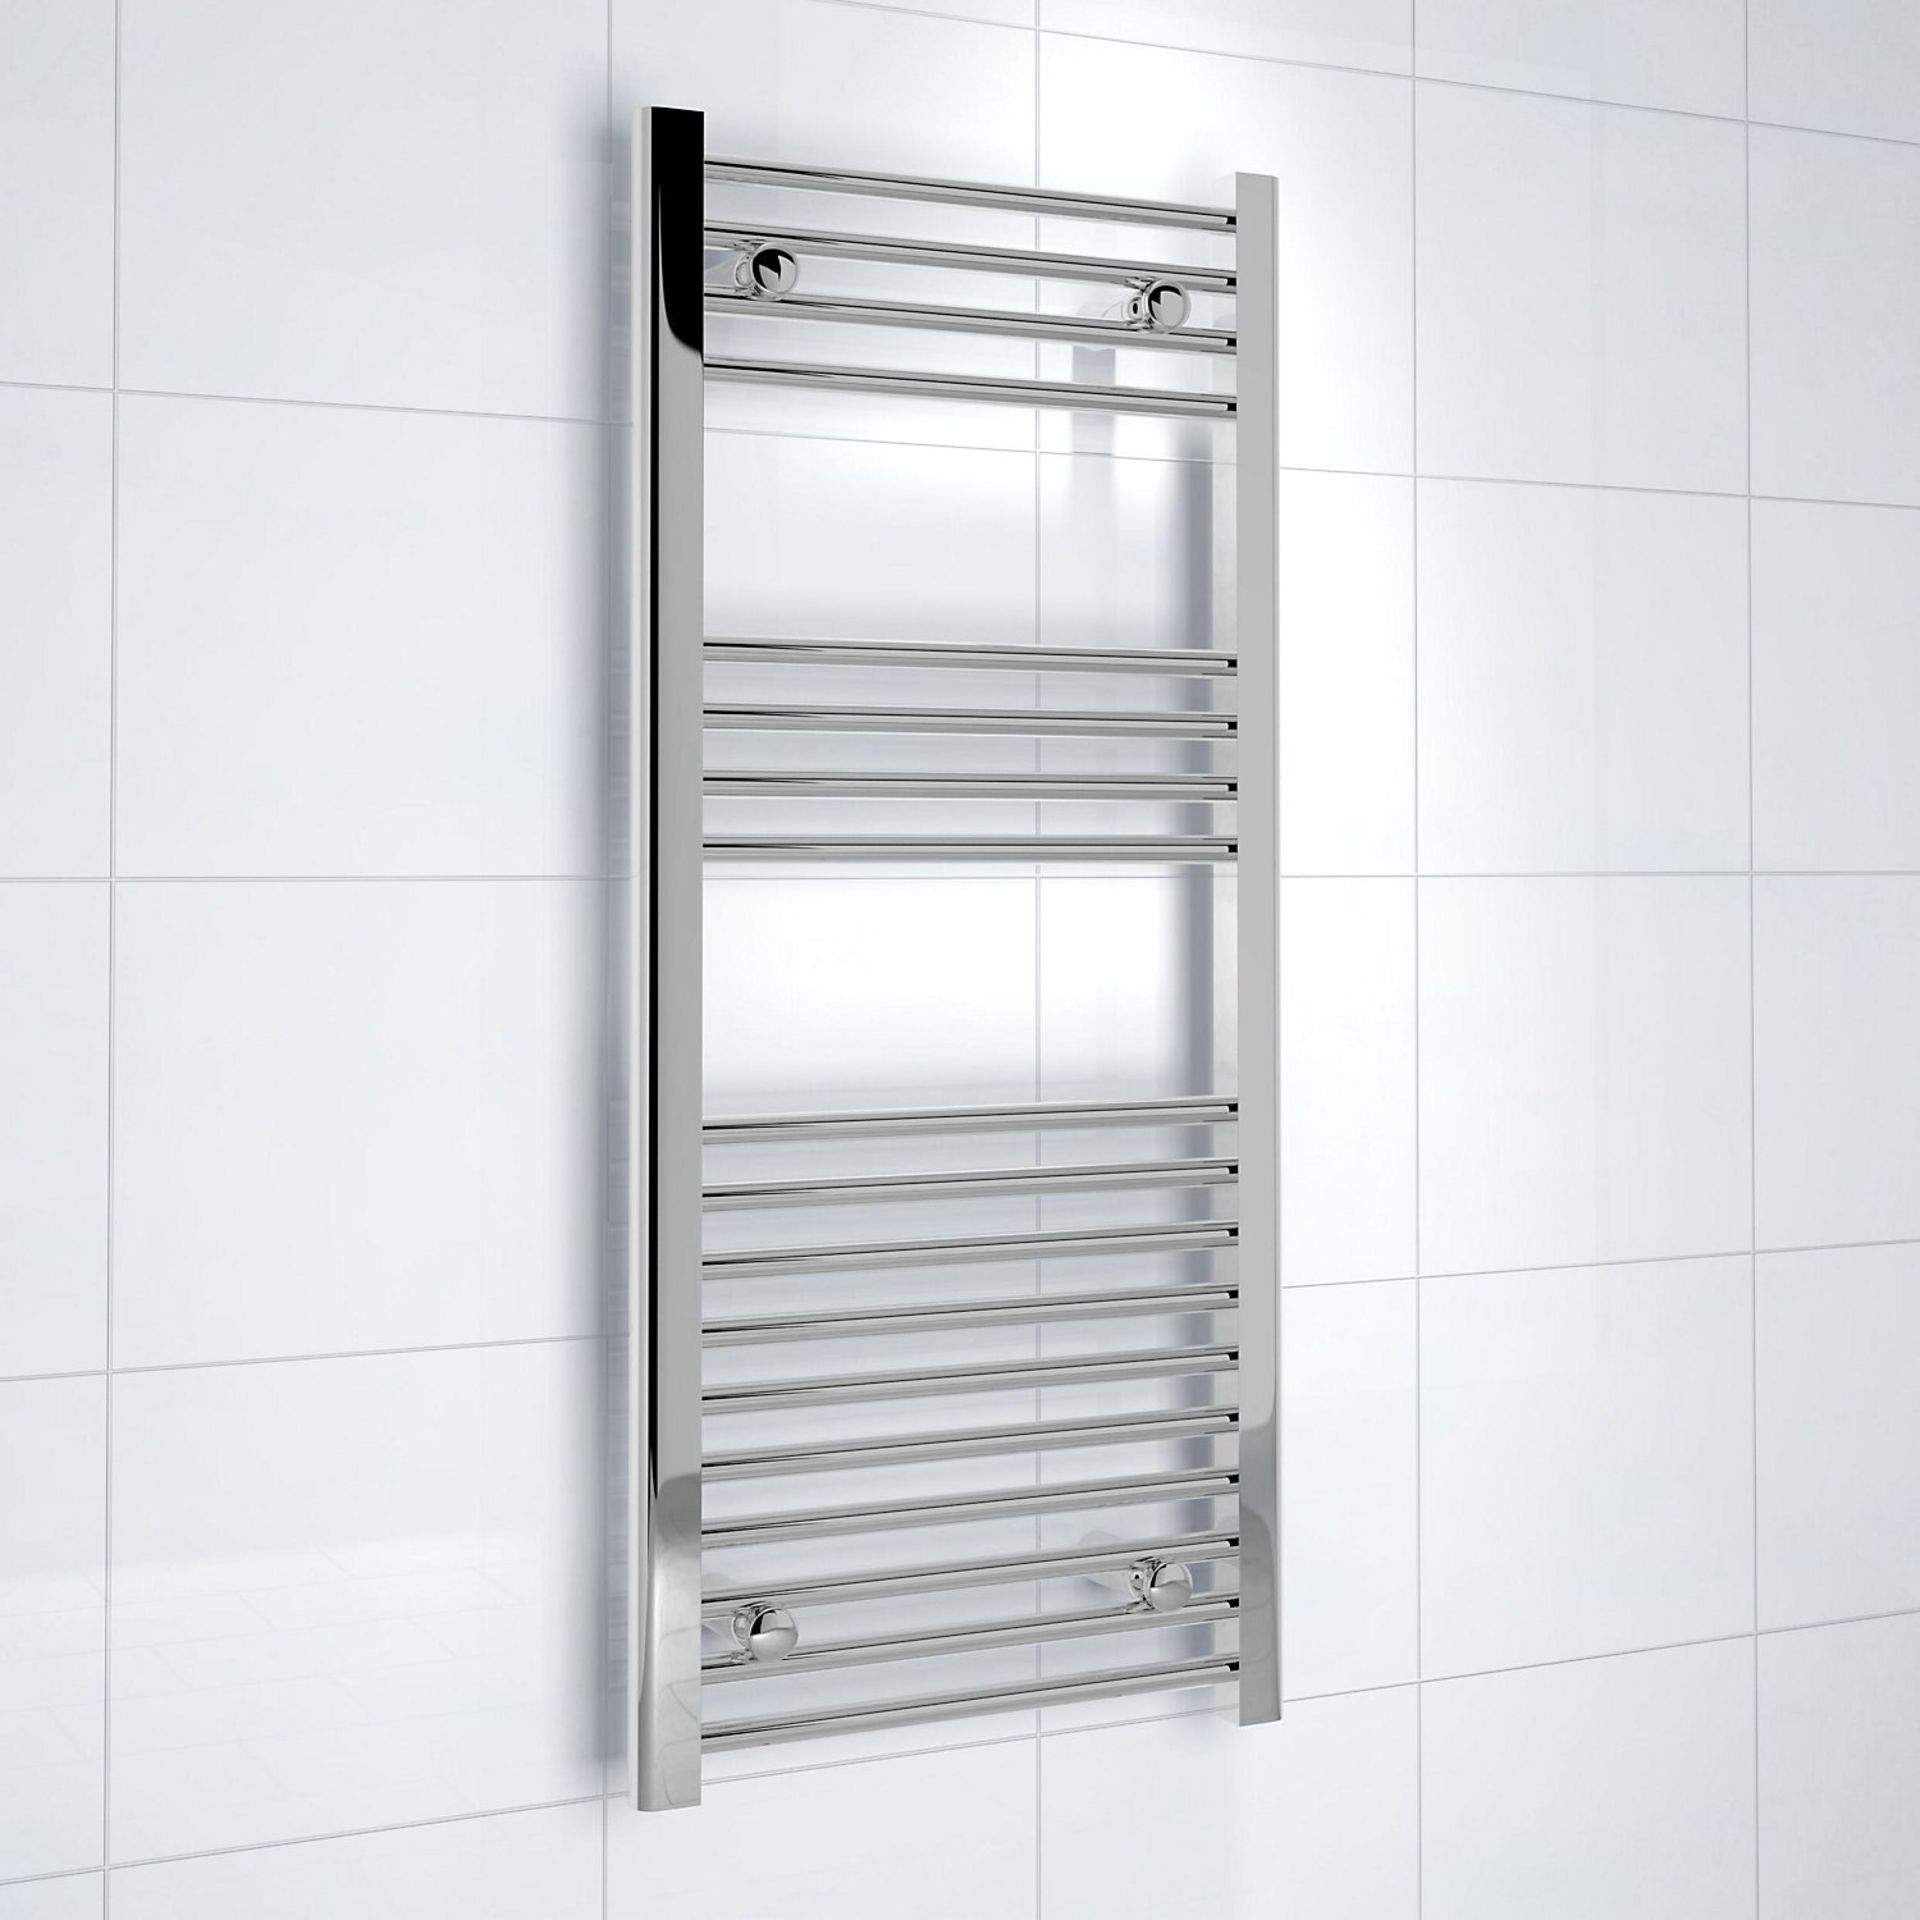 (CT123) 1000 X 450MM Kudox Silver Electric Towel heater. A great towel warmer not only heats your - Image 2 of 3